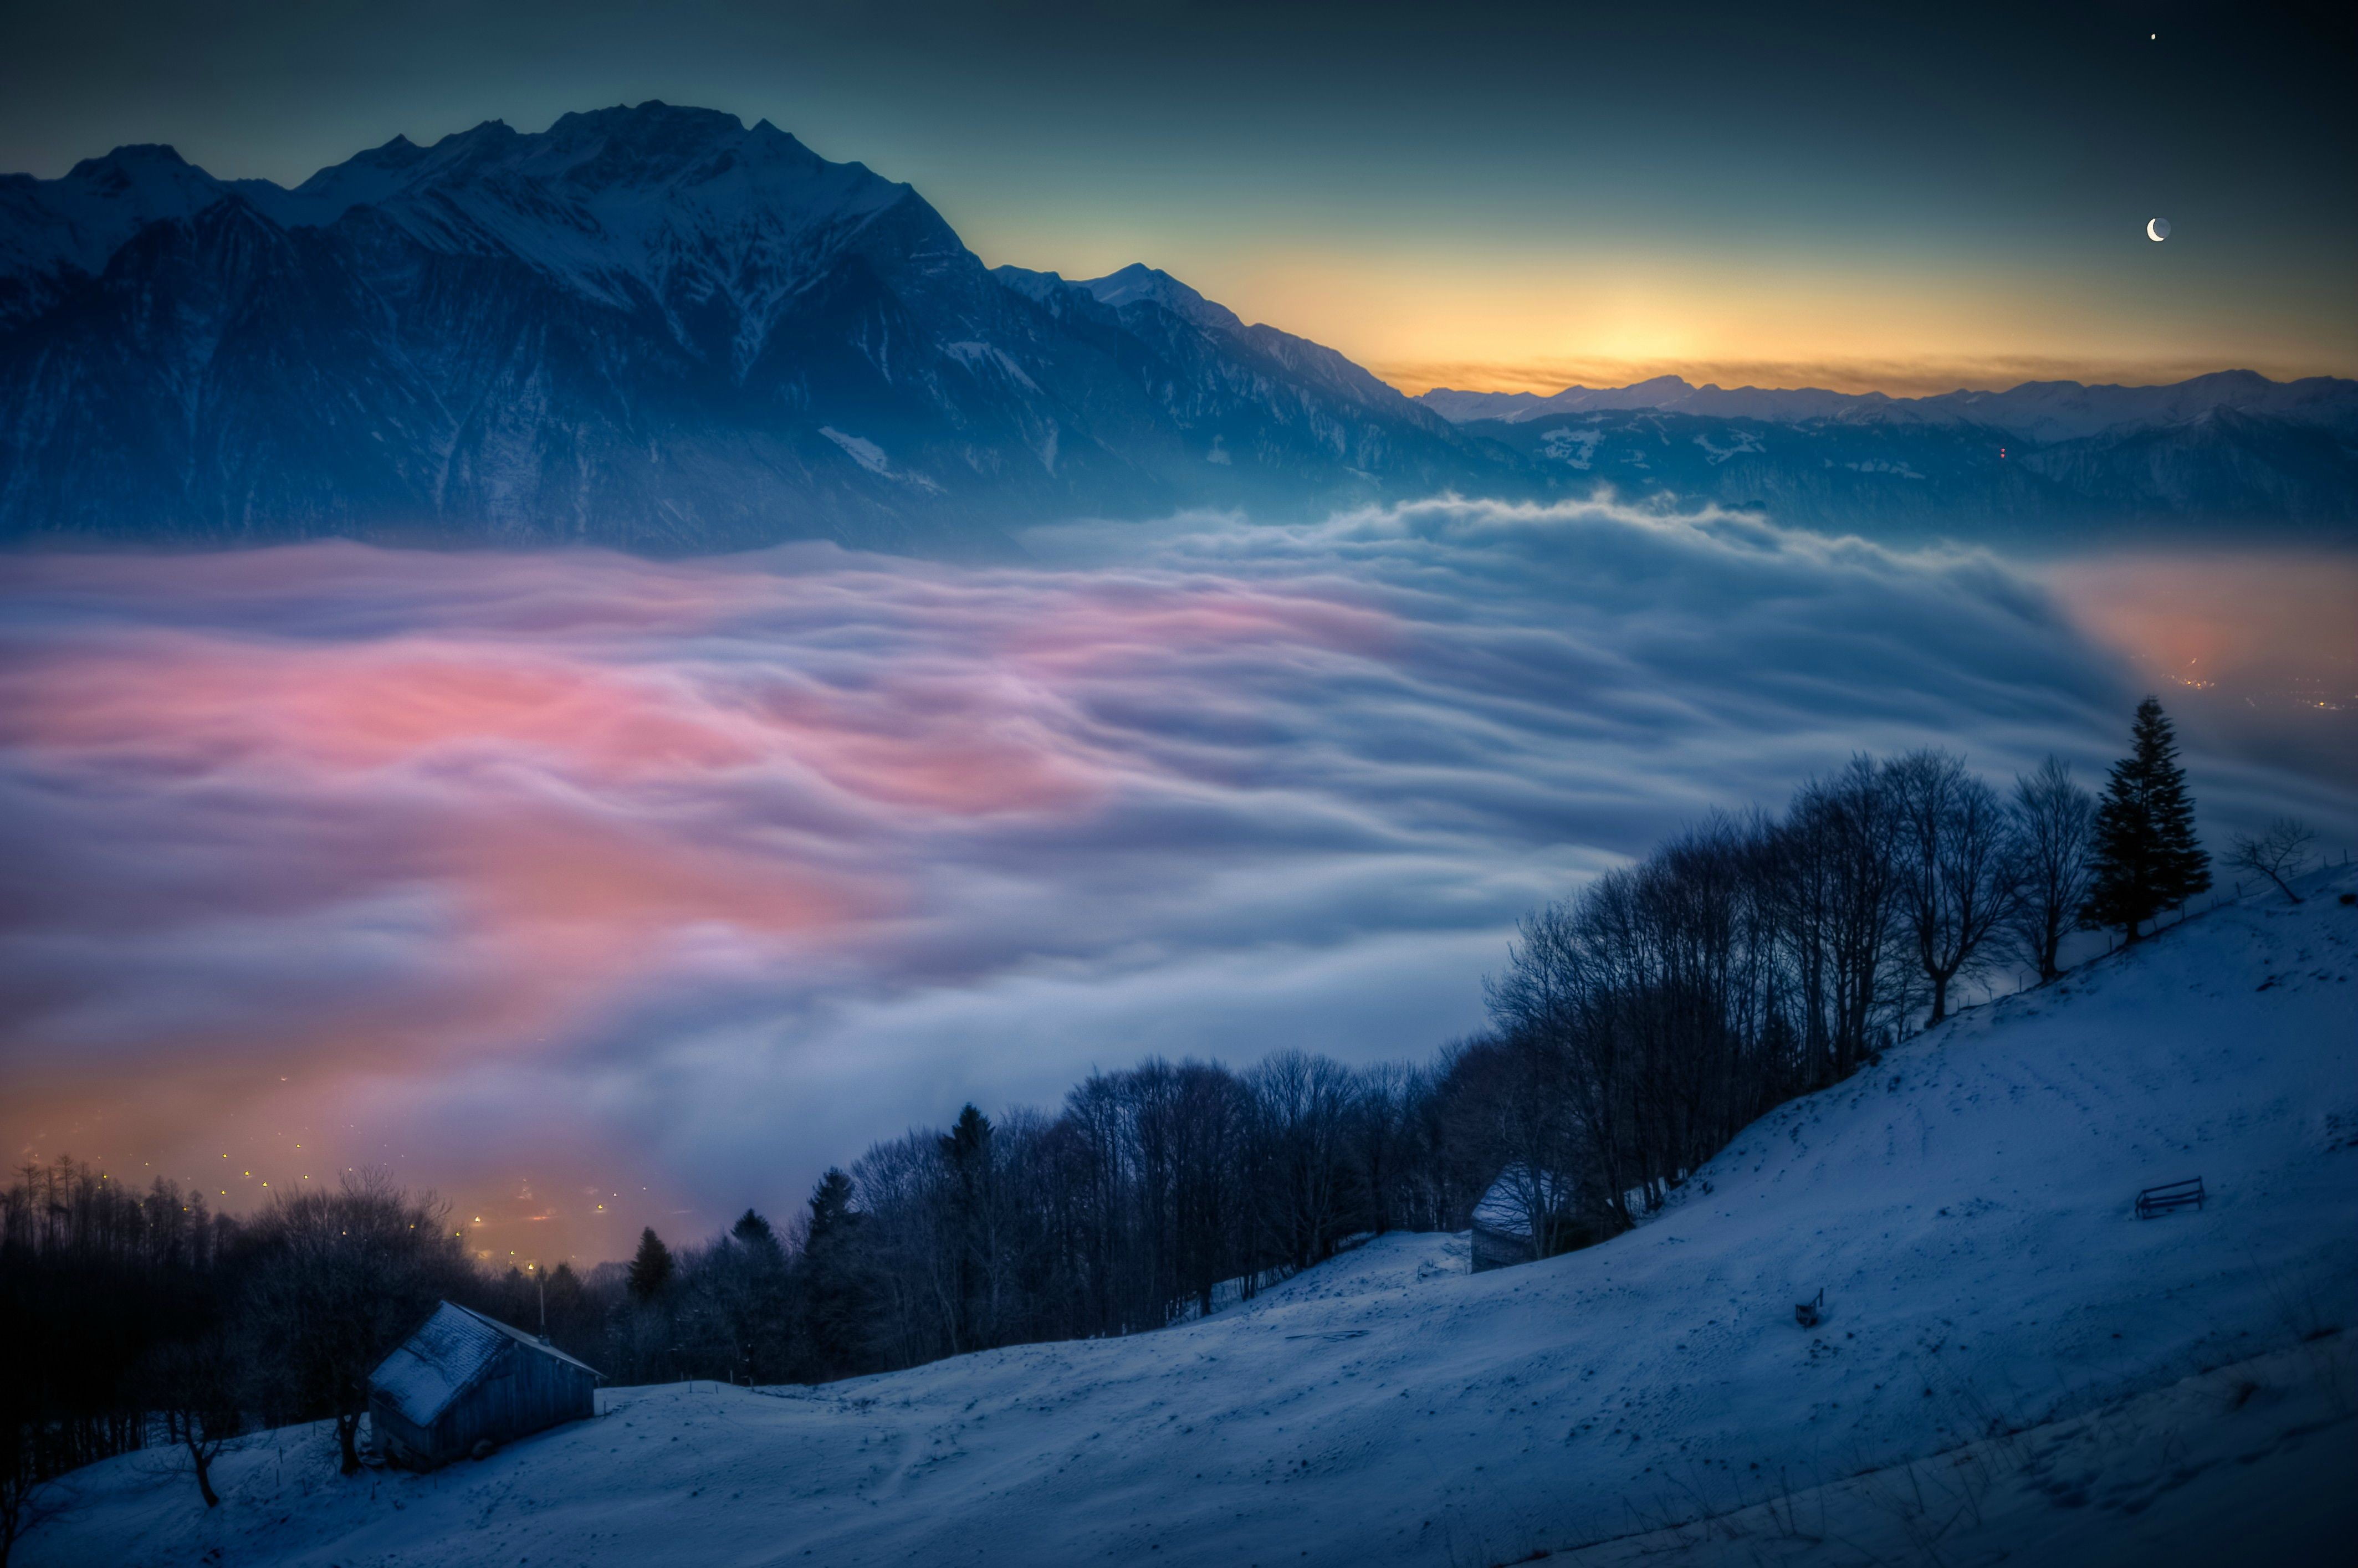 sea of clouds scenery, snow, sunset, mountains, mist